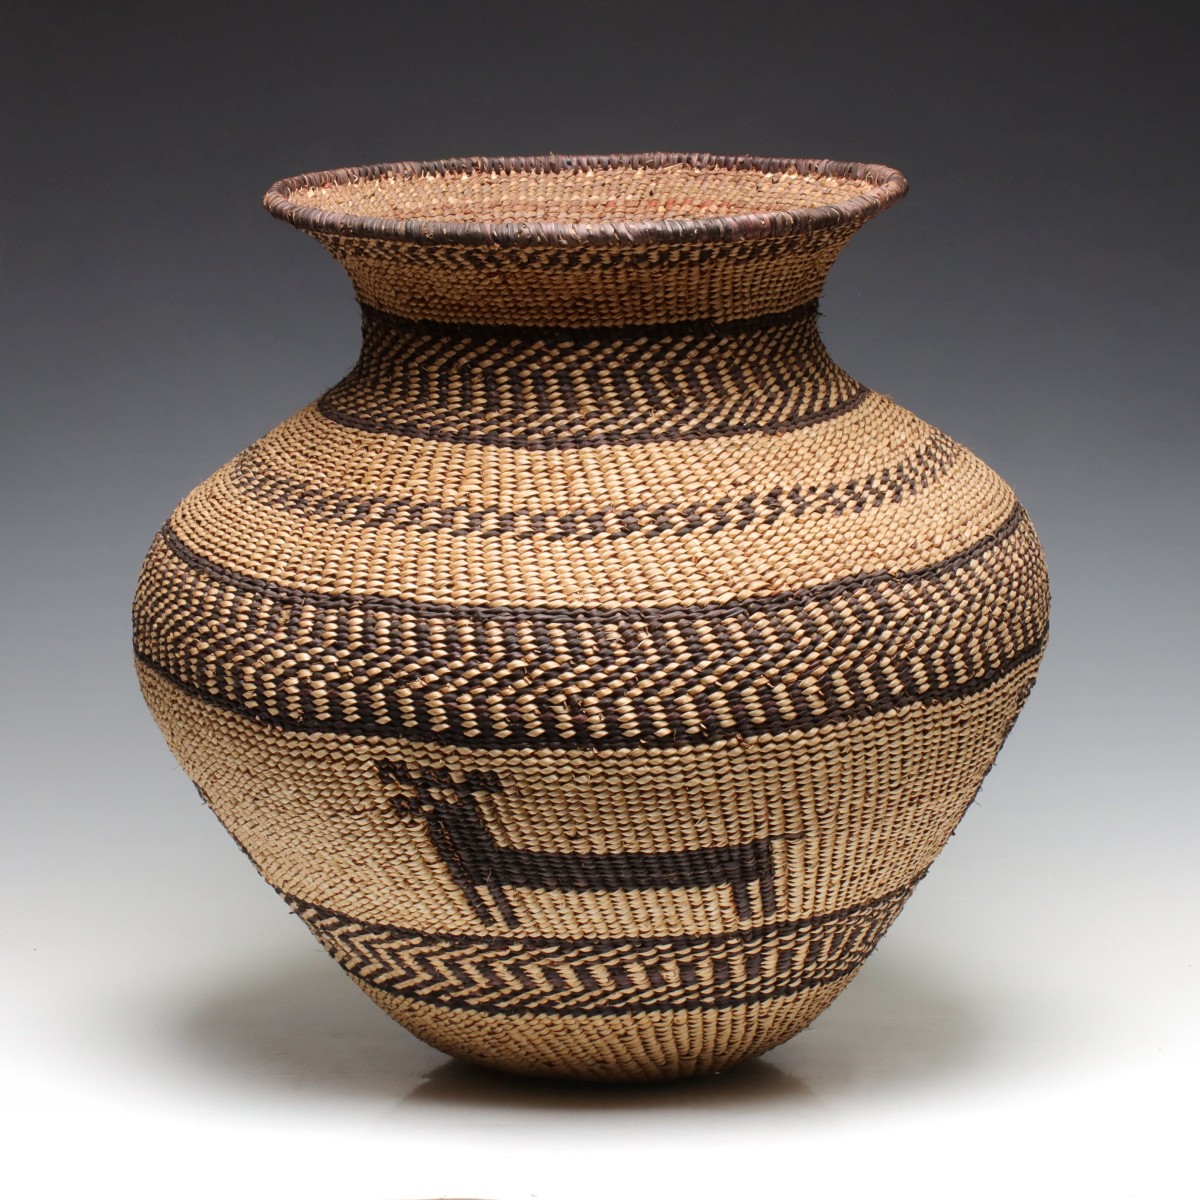 A LARGE BASKETRY OLLA ATTRIBUTED AS CONTEMPORARY APACHE